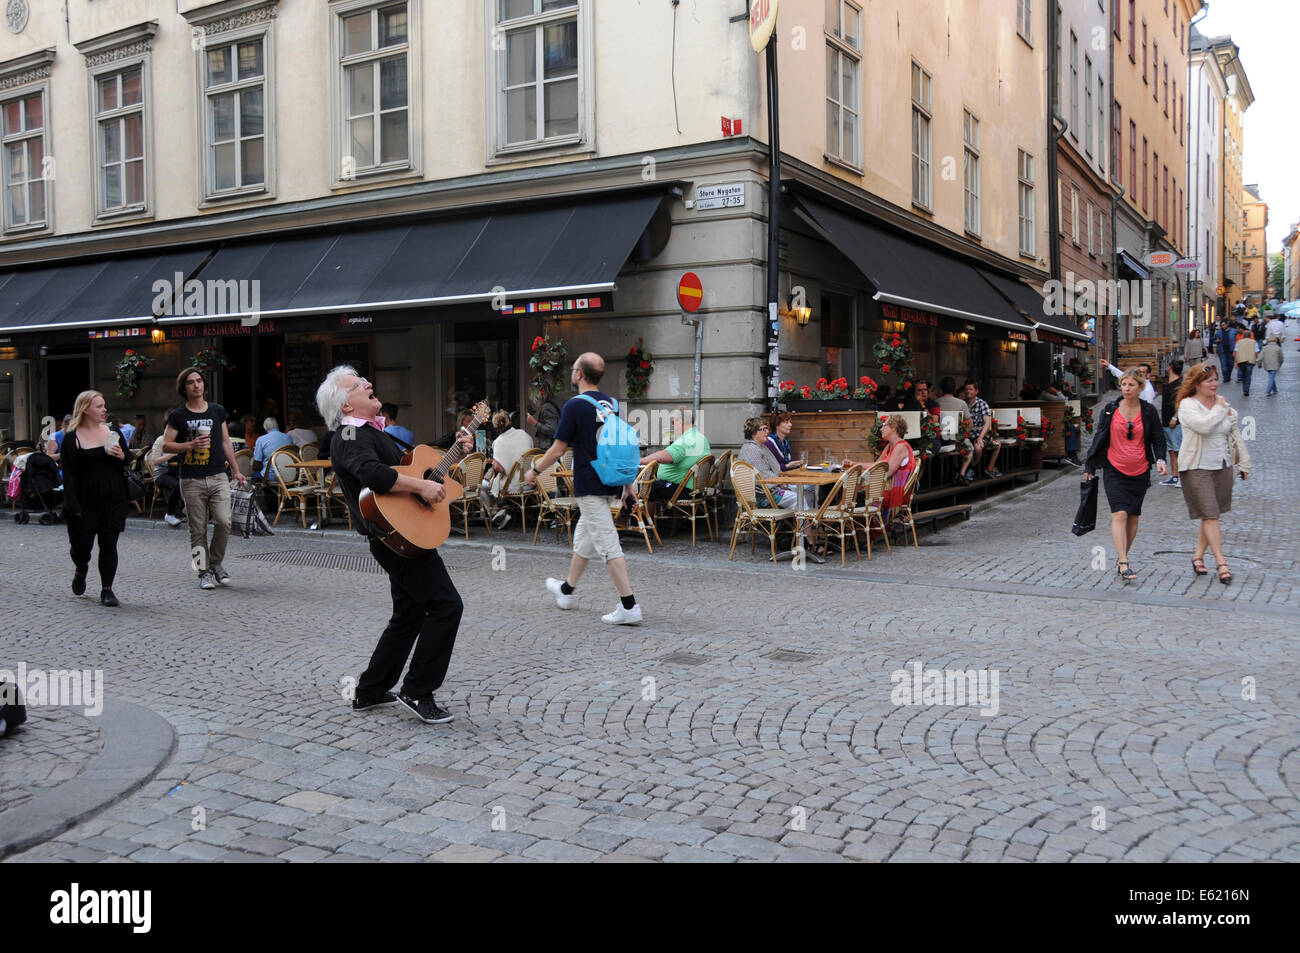 Street life in old Stockholm with sidewalk restaurants, coffee shops, pedestrians and musicians along cobblestone streets Stock Photo